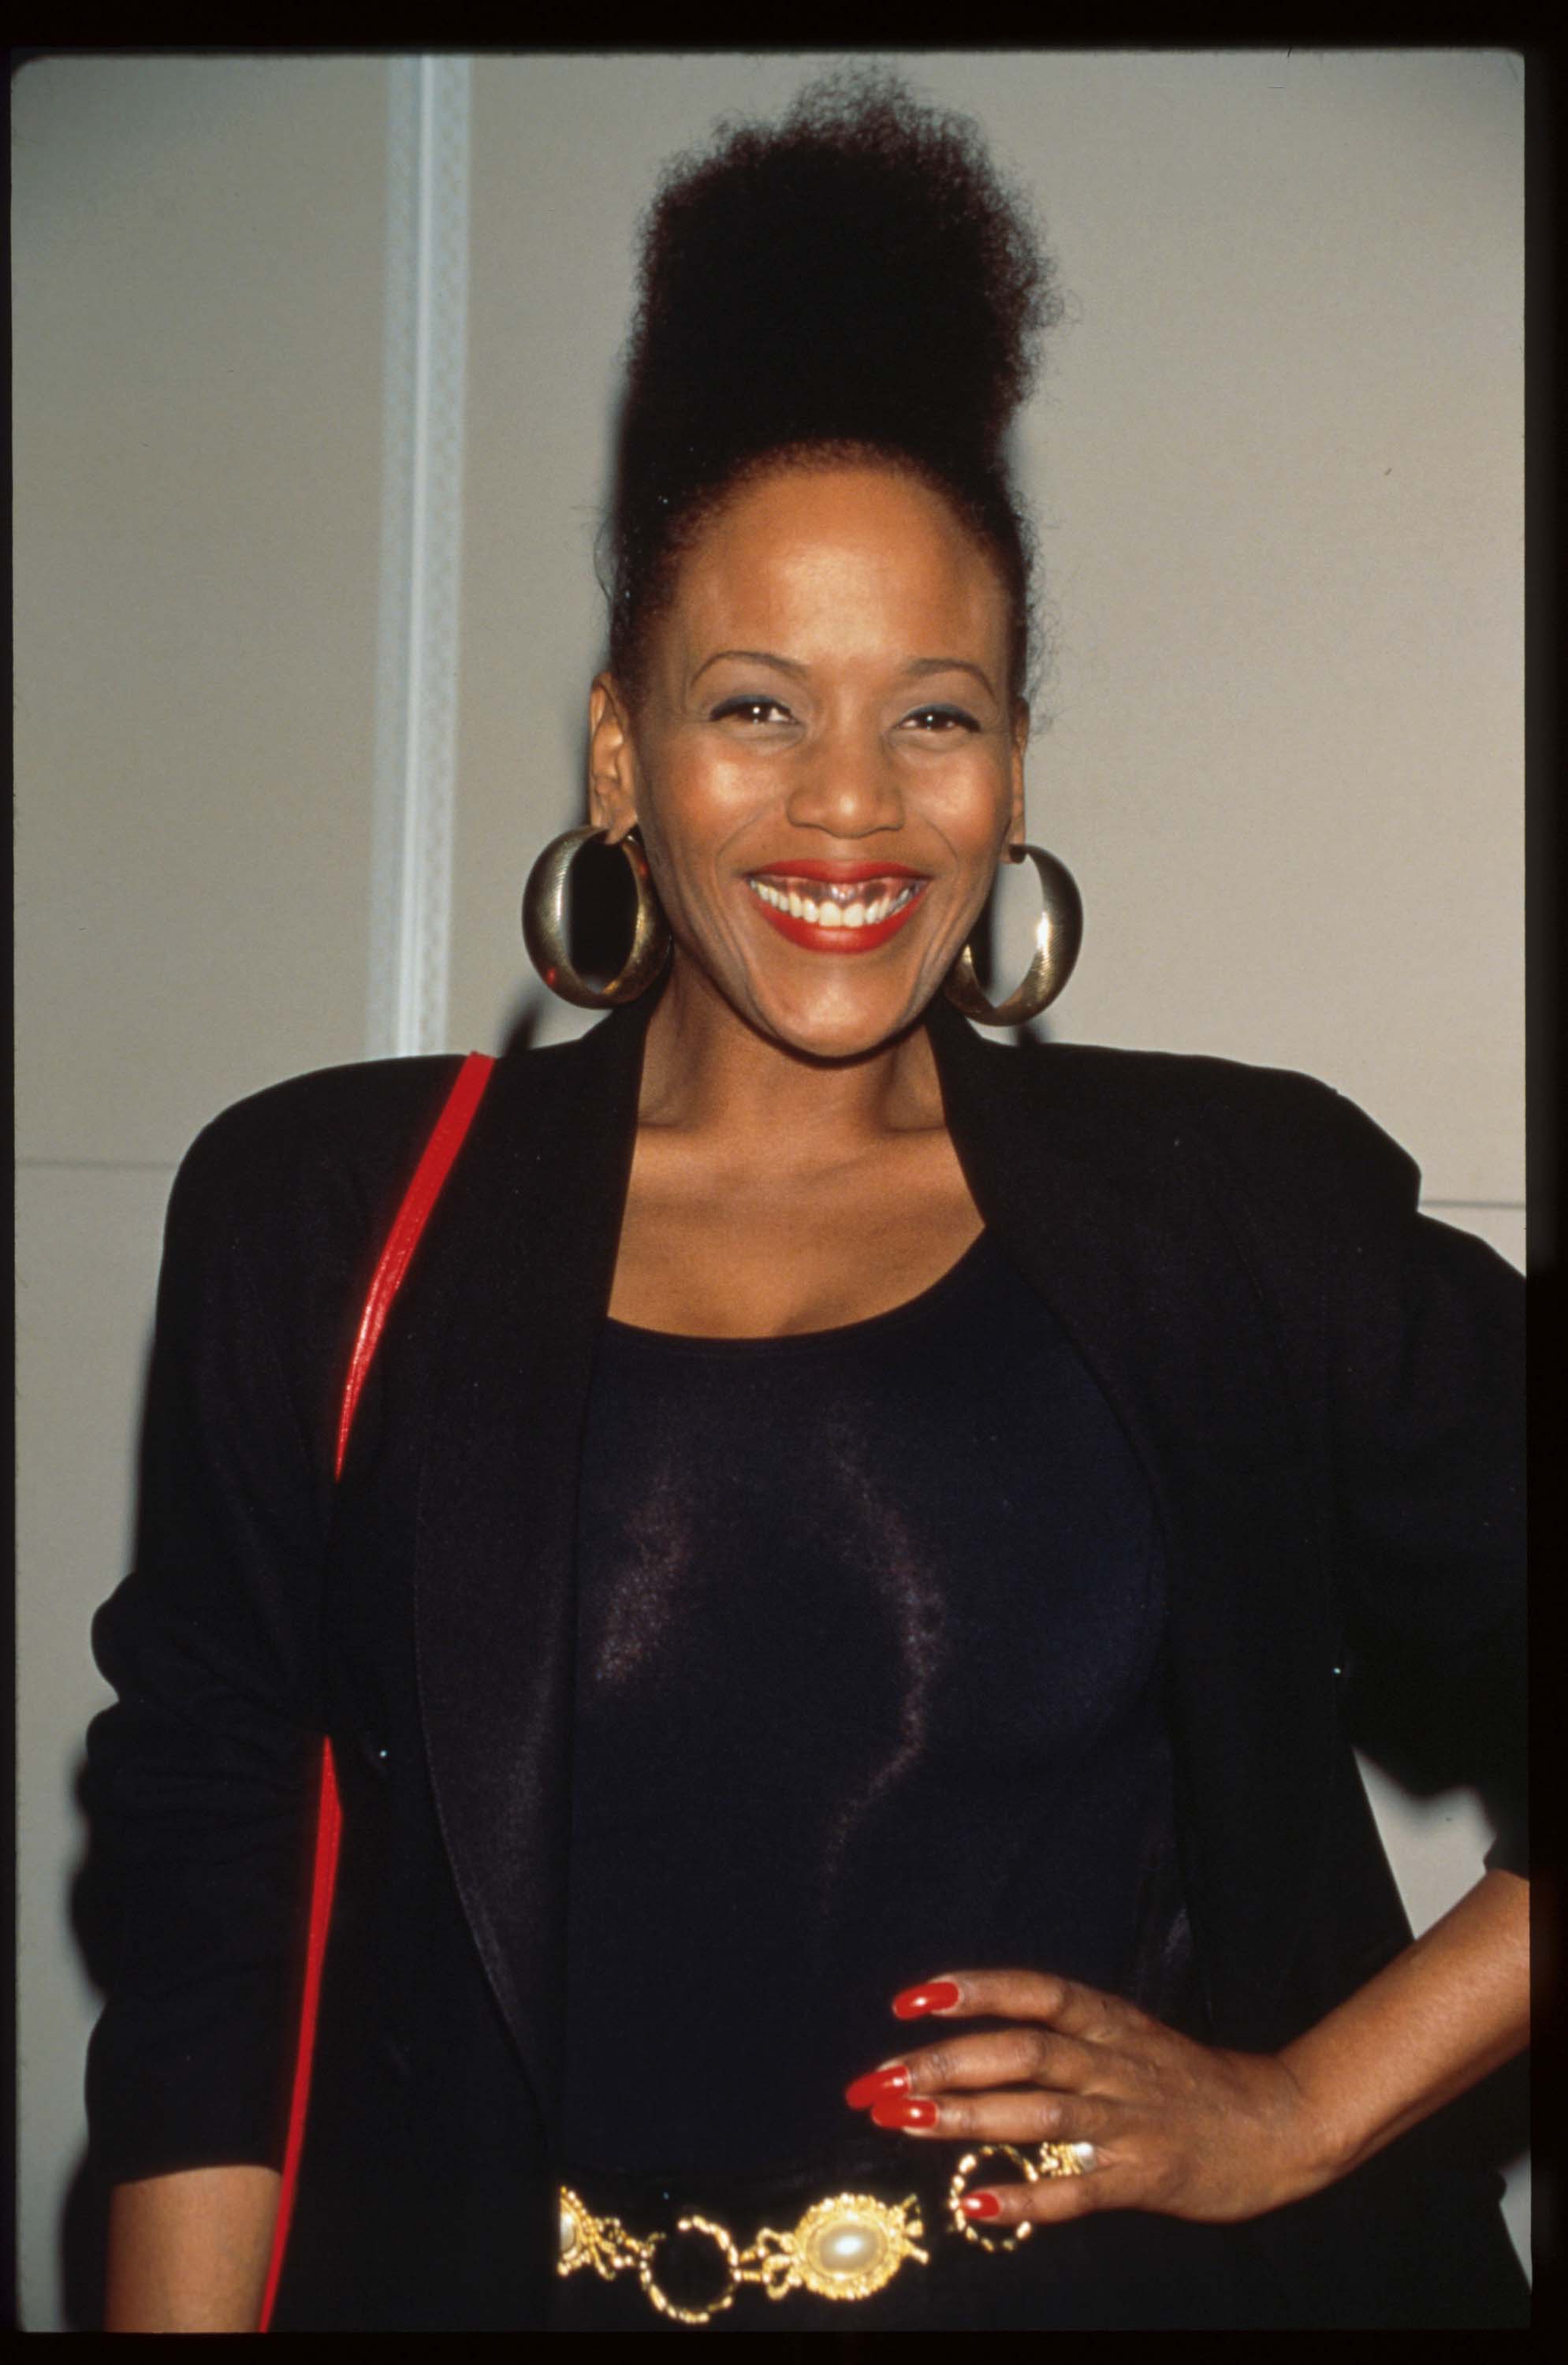 Toukie Smith attends the Sports Ball benefit dinner April 18, 1996 in New York City | Photo: Getty Images